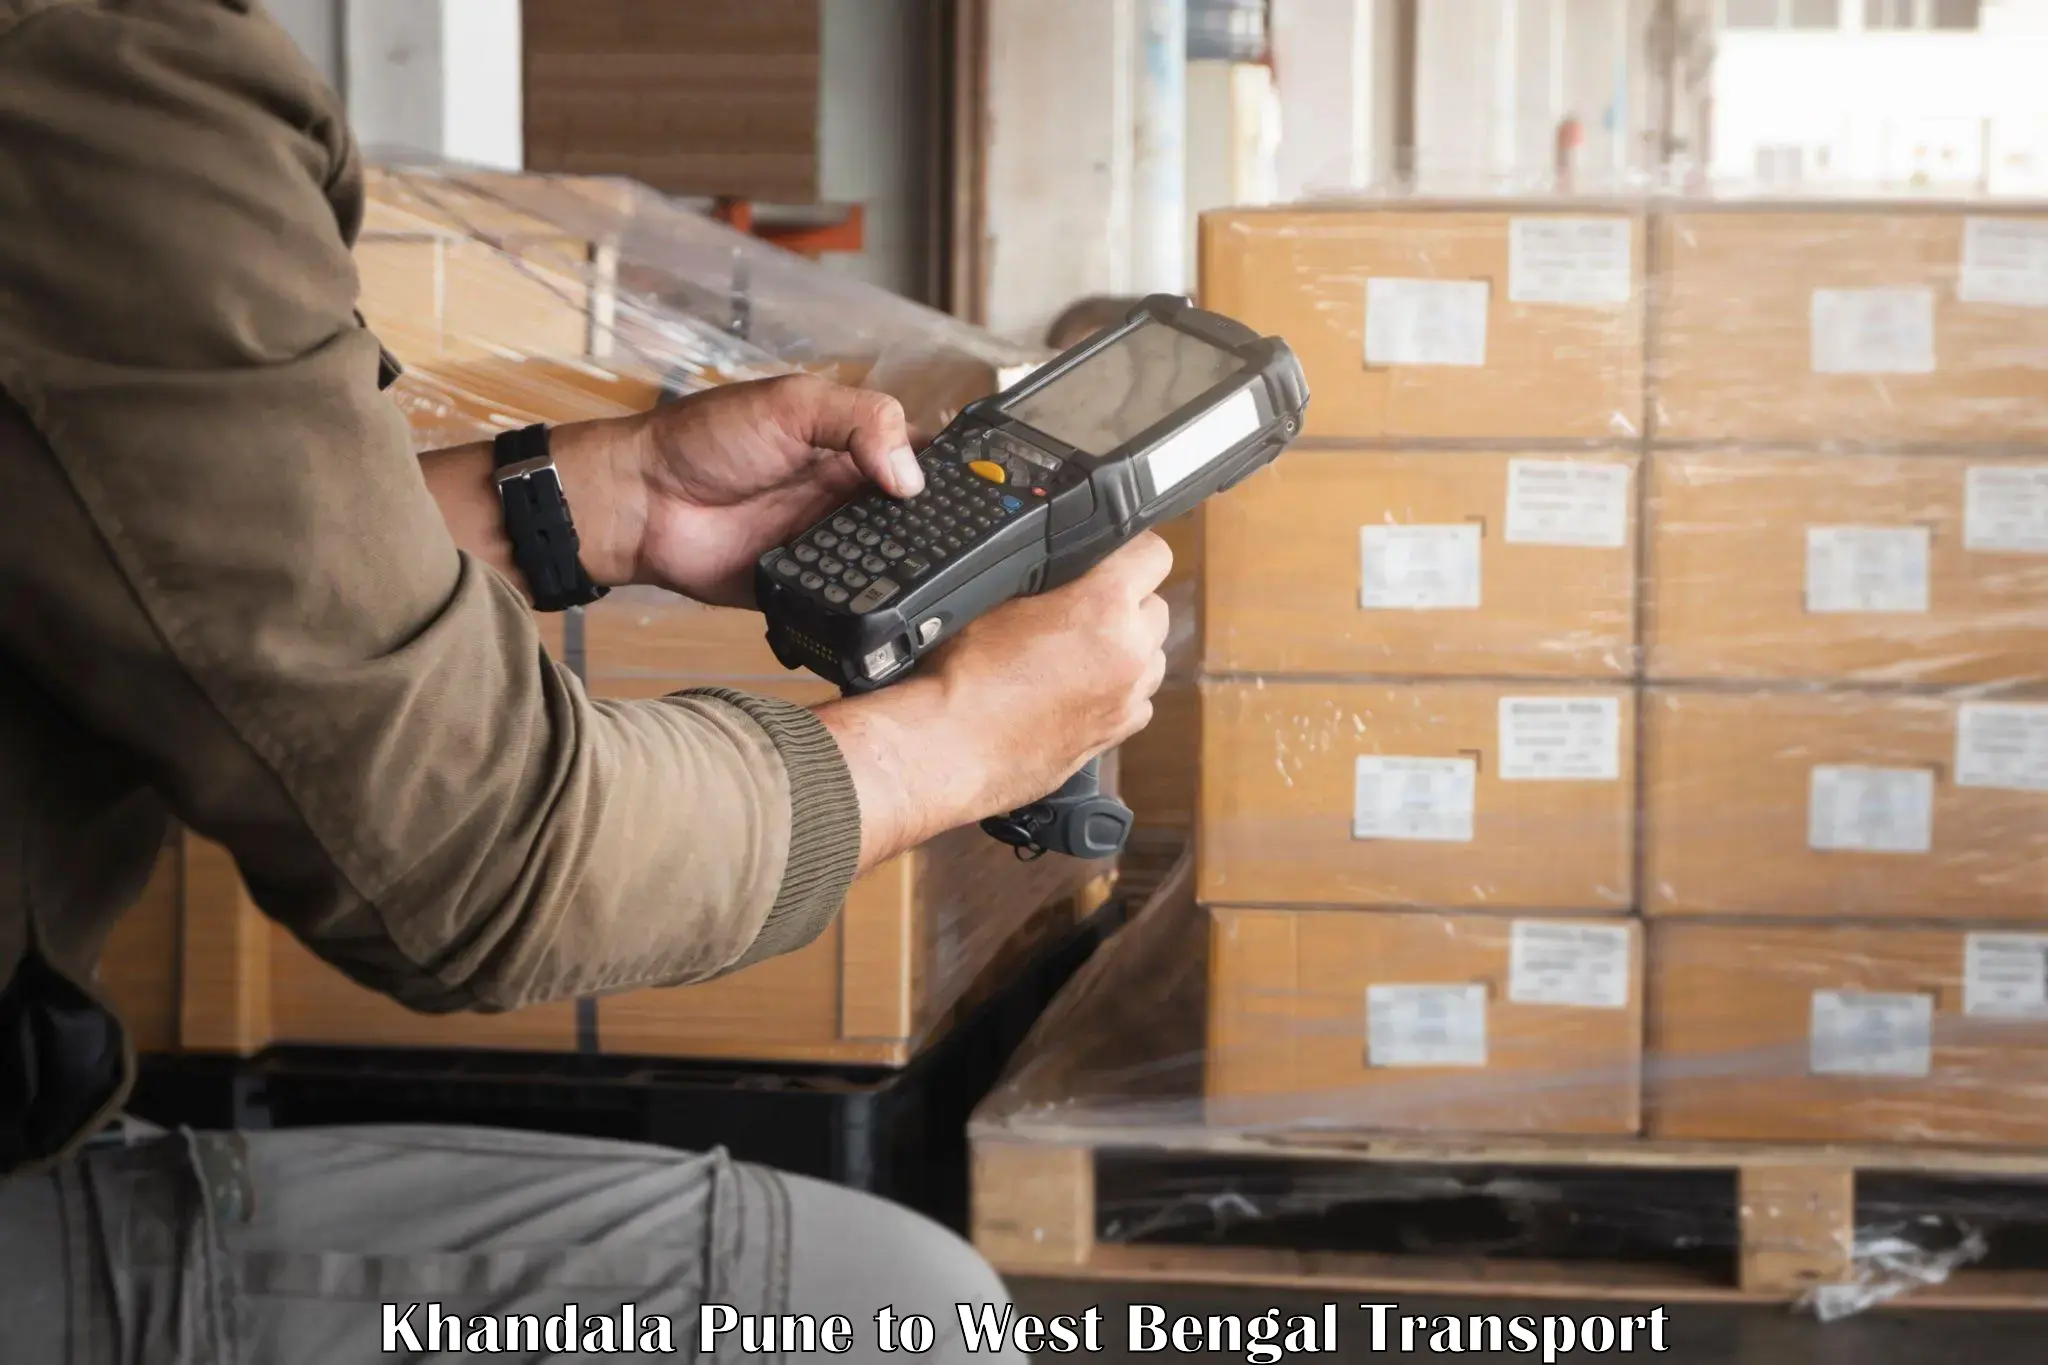 Part load transport service in India Khandala Pune to West Bengal